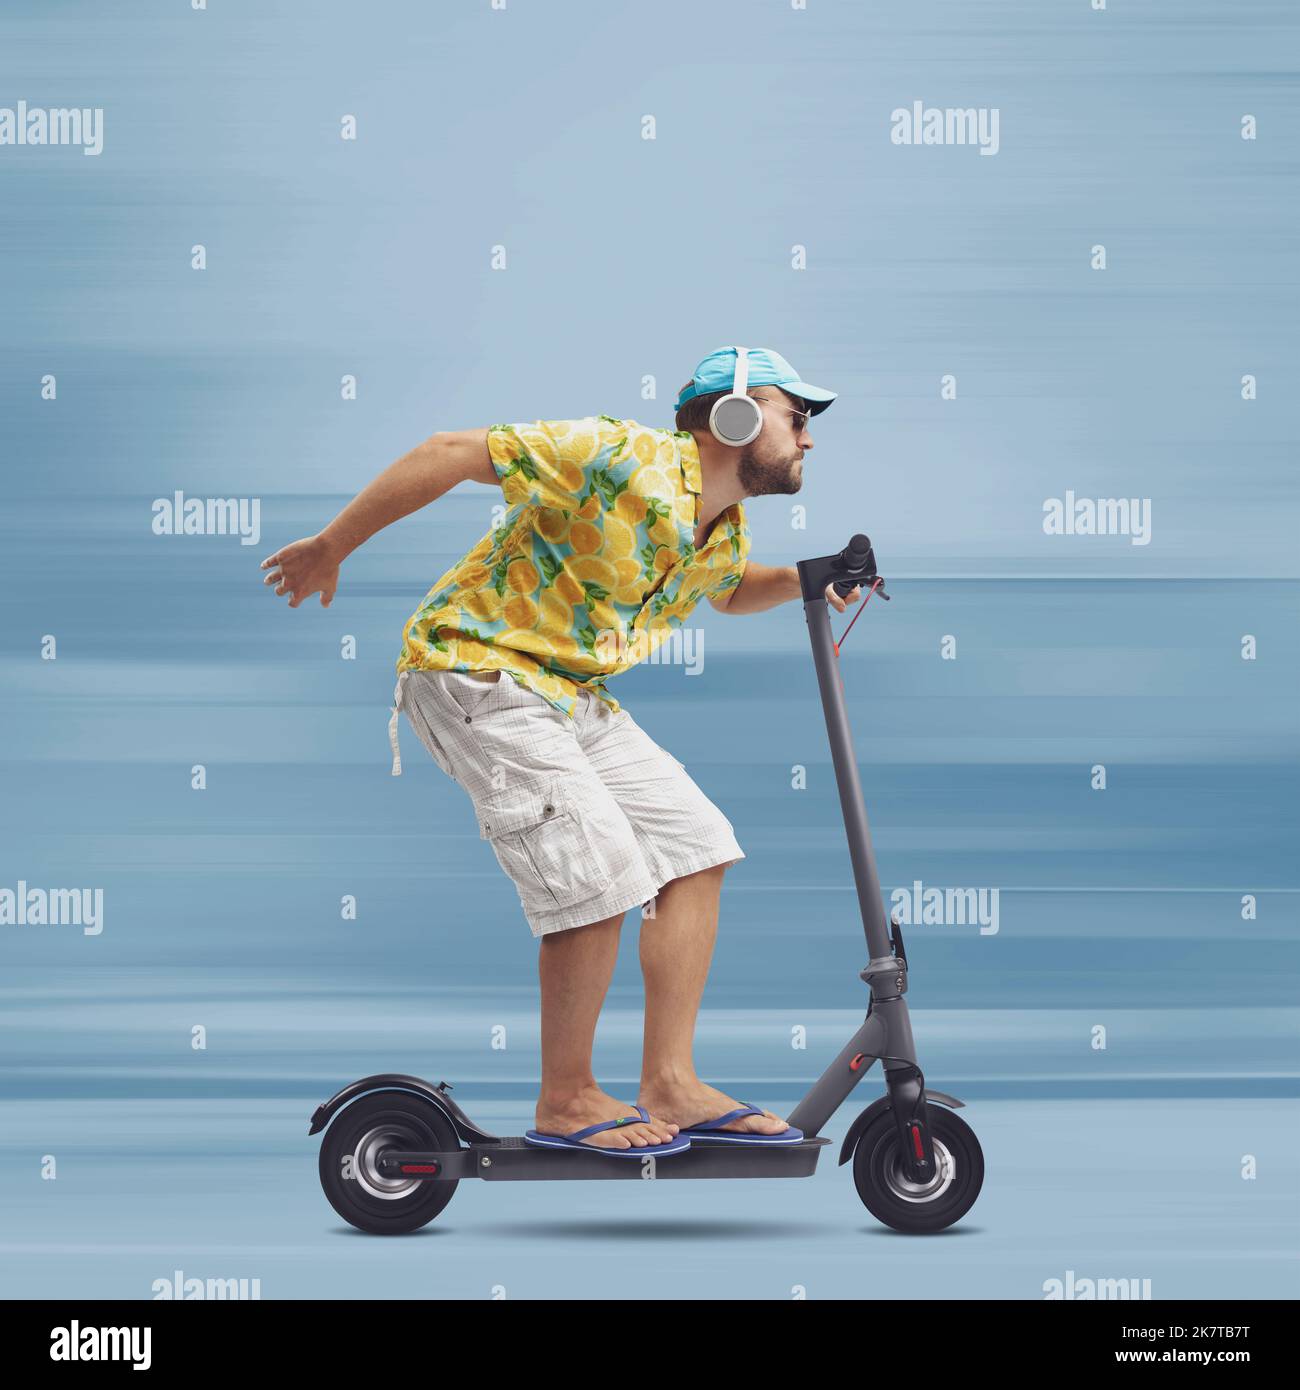 Cool stylish man wearing a colorful beach shirt and riding a fast eco-friendly electric scooter, smart mobility concept Stock Photo